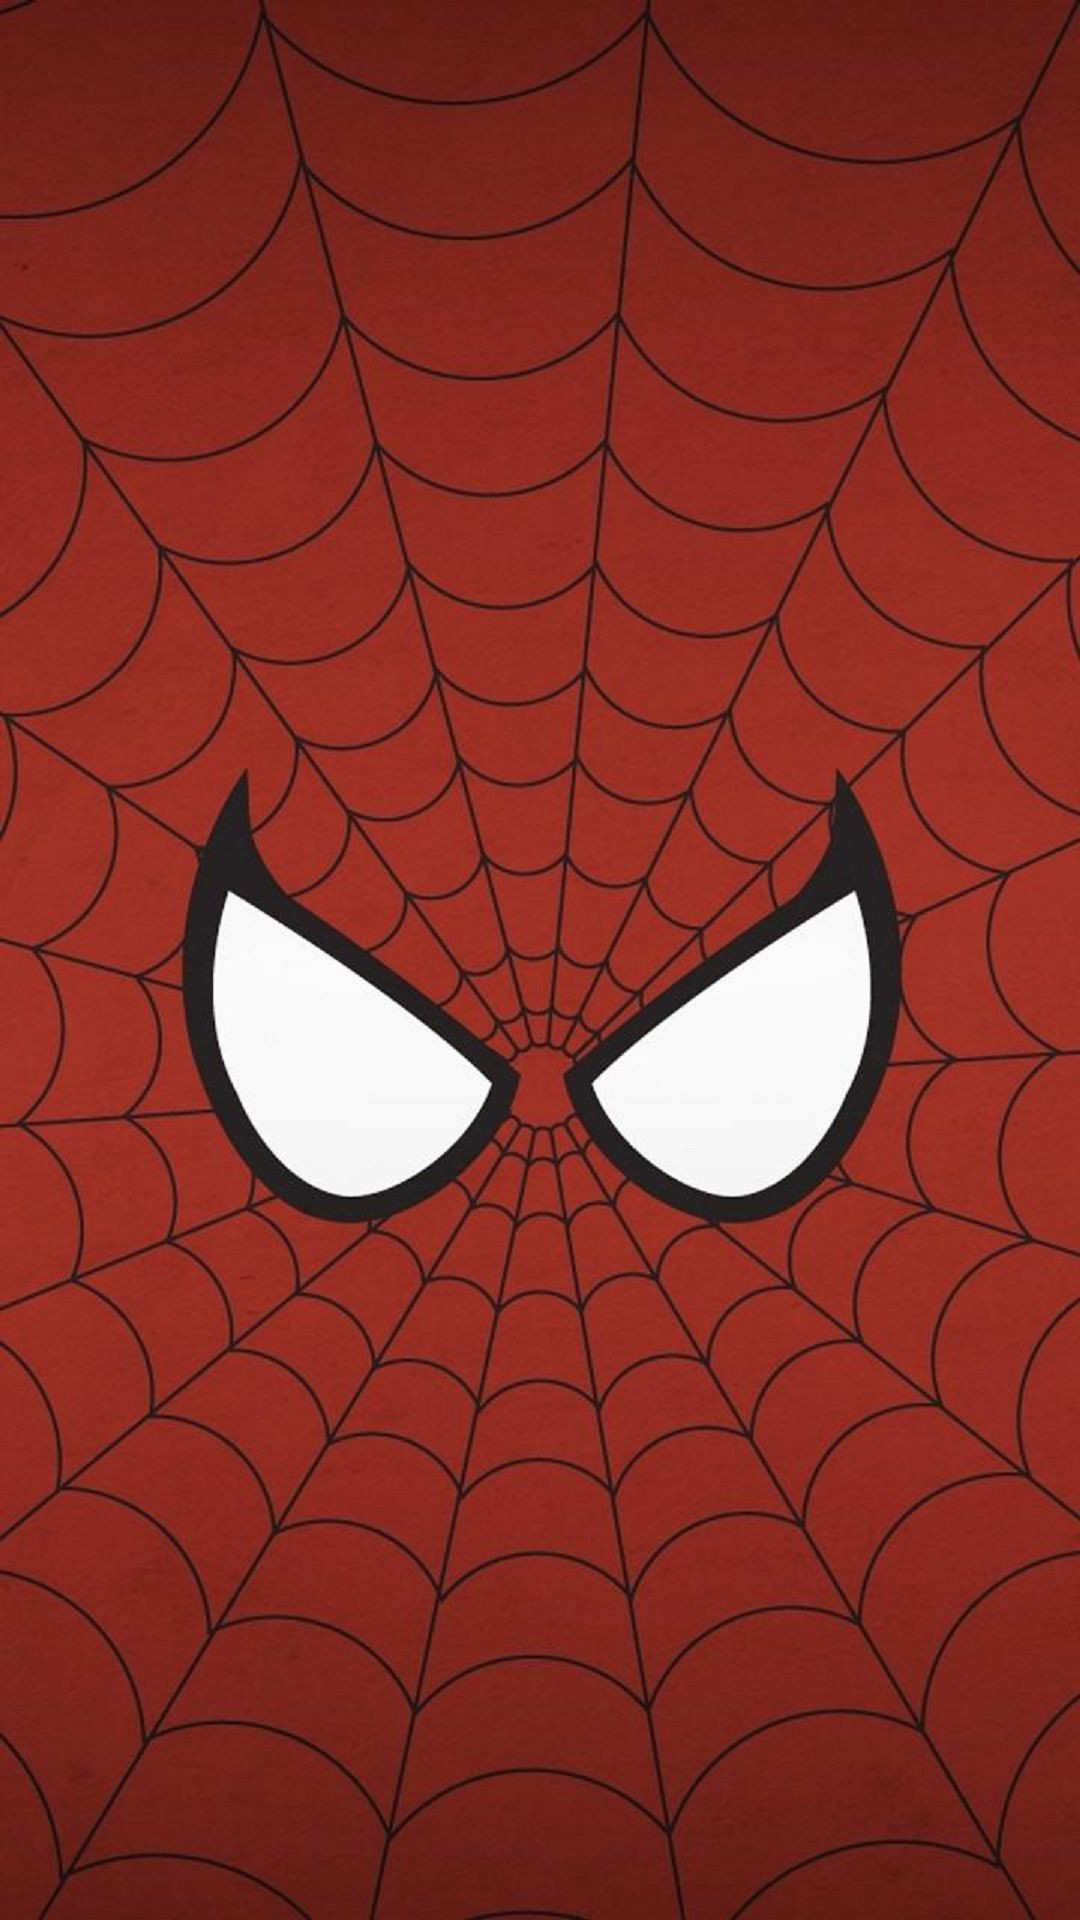 1080x1920 Spiderman Wallpaper Android / Image Source